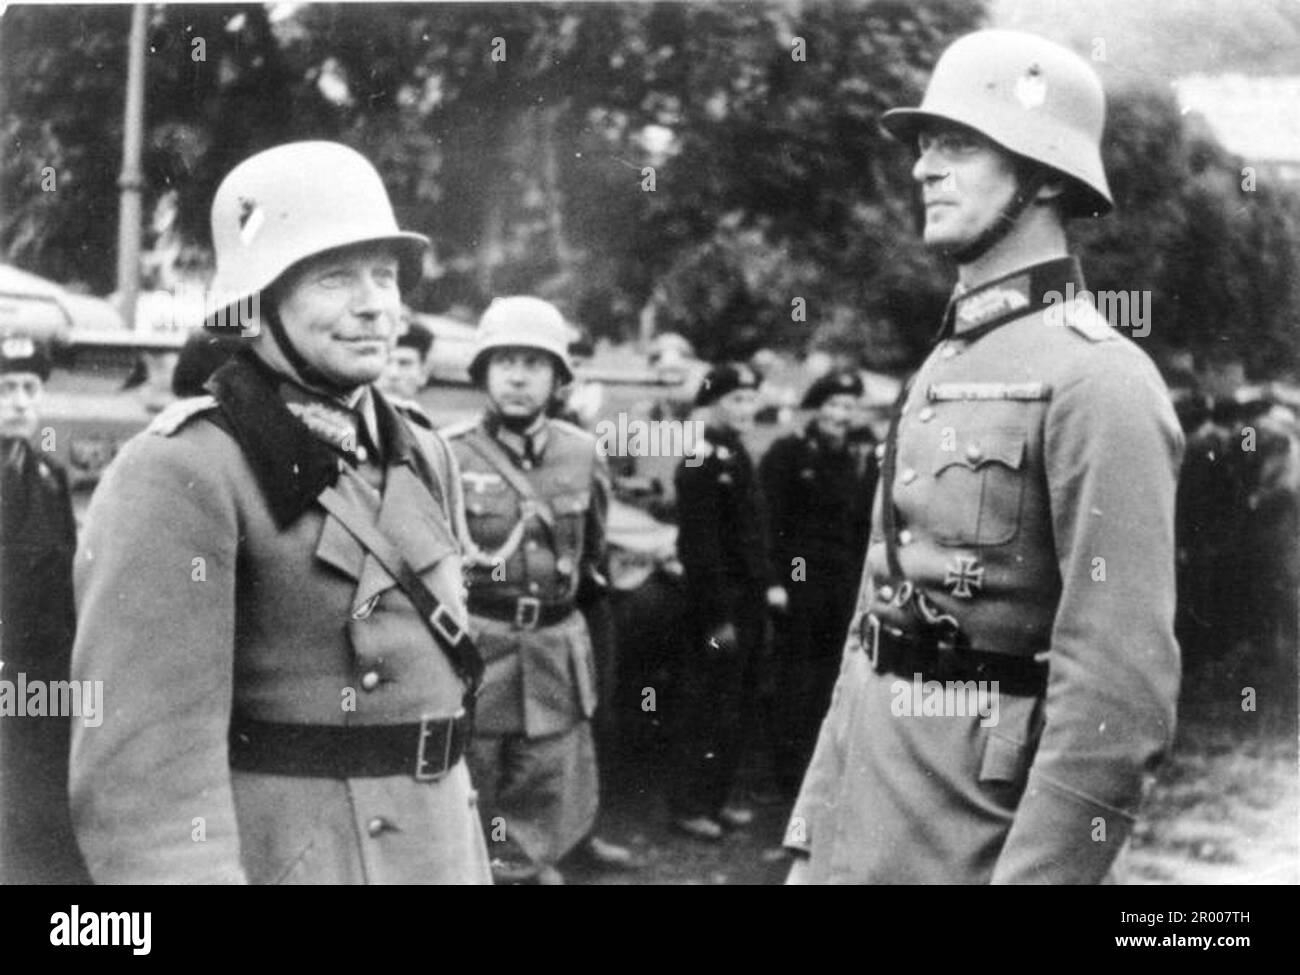 General Heinz Guderian (left) and General Georg-Hans Reinhardt conferring during teh annexation of the Sudetenland in Oct 1938 Stock Photo